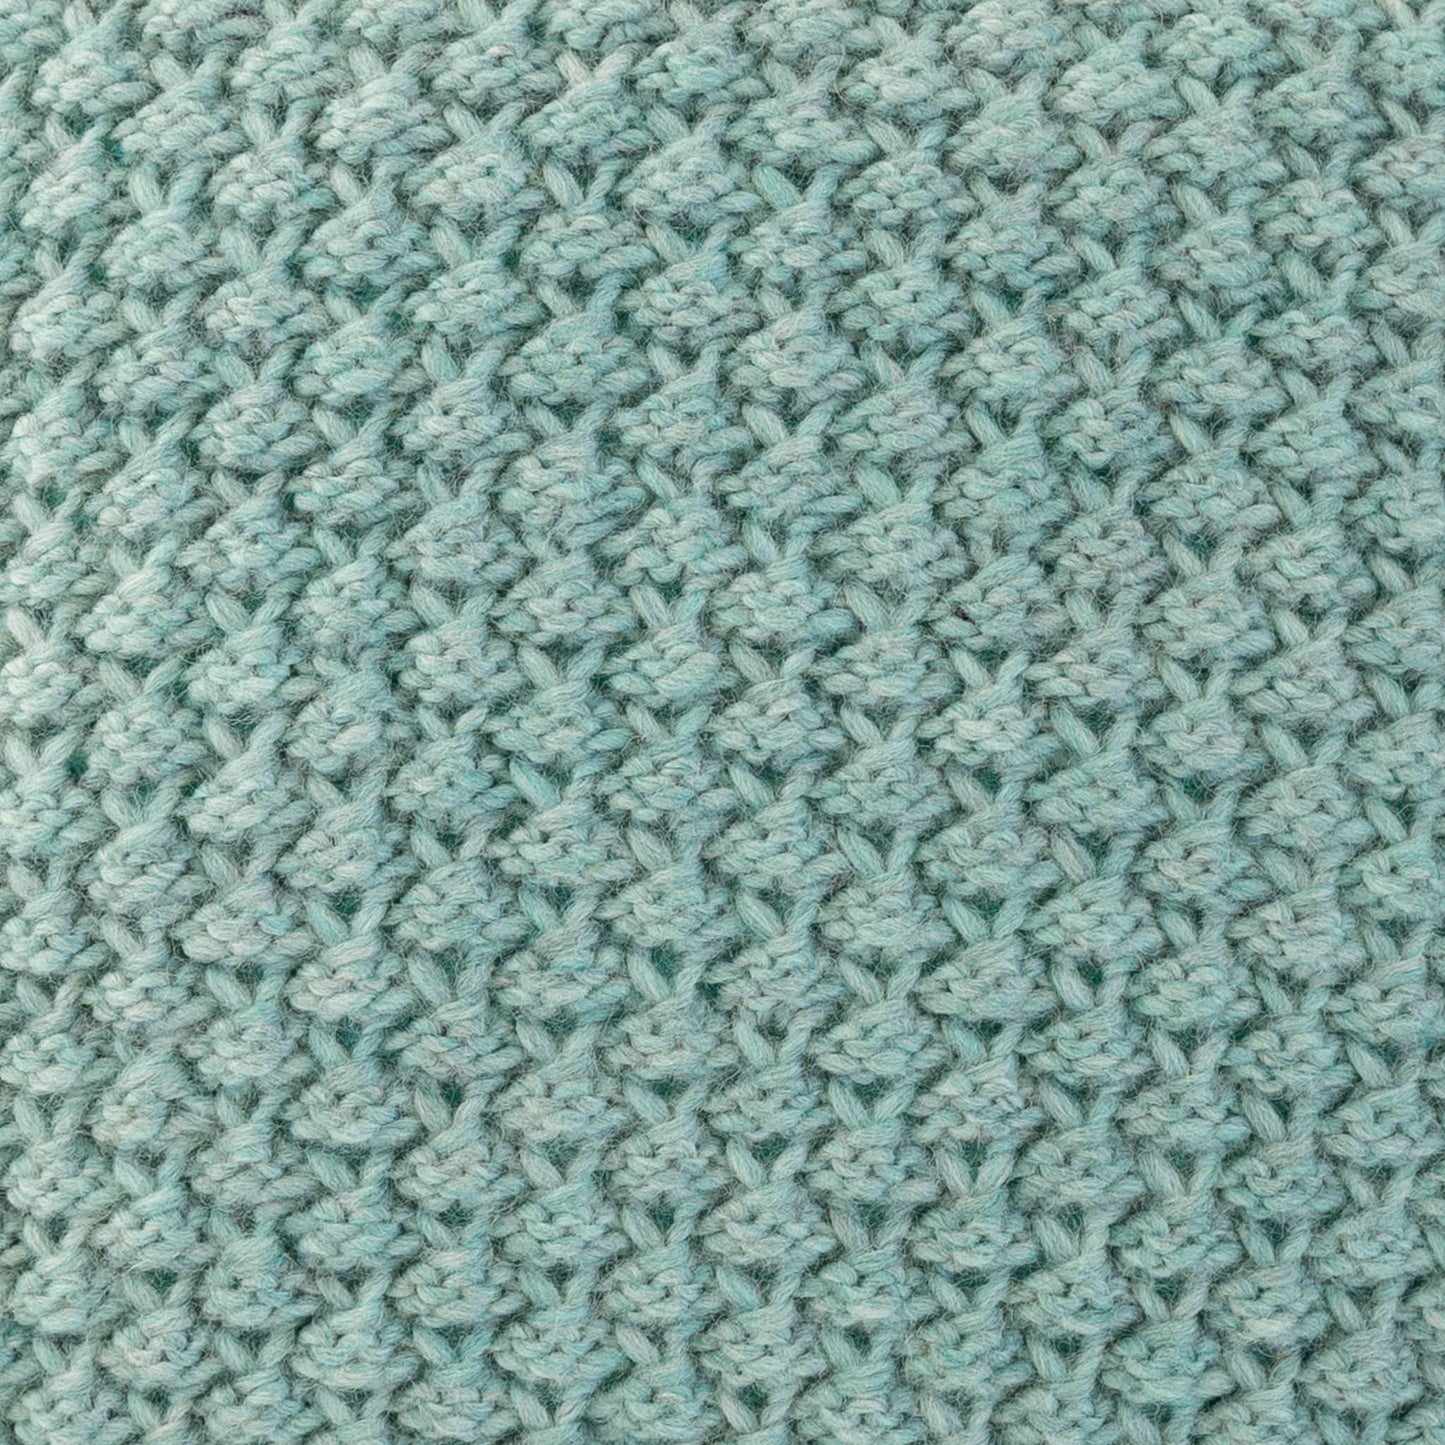 Knitted Wool Throw Pillow Cover | Seafoam